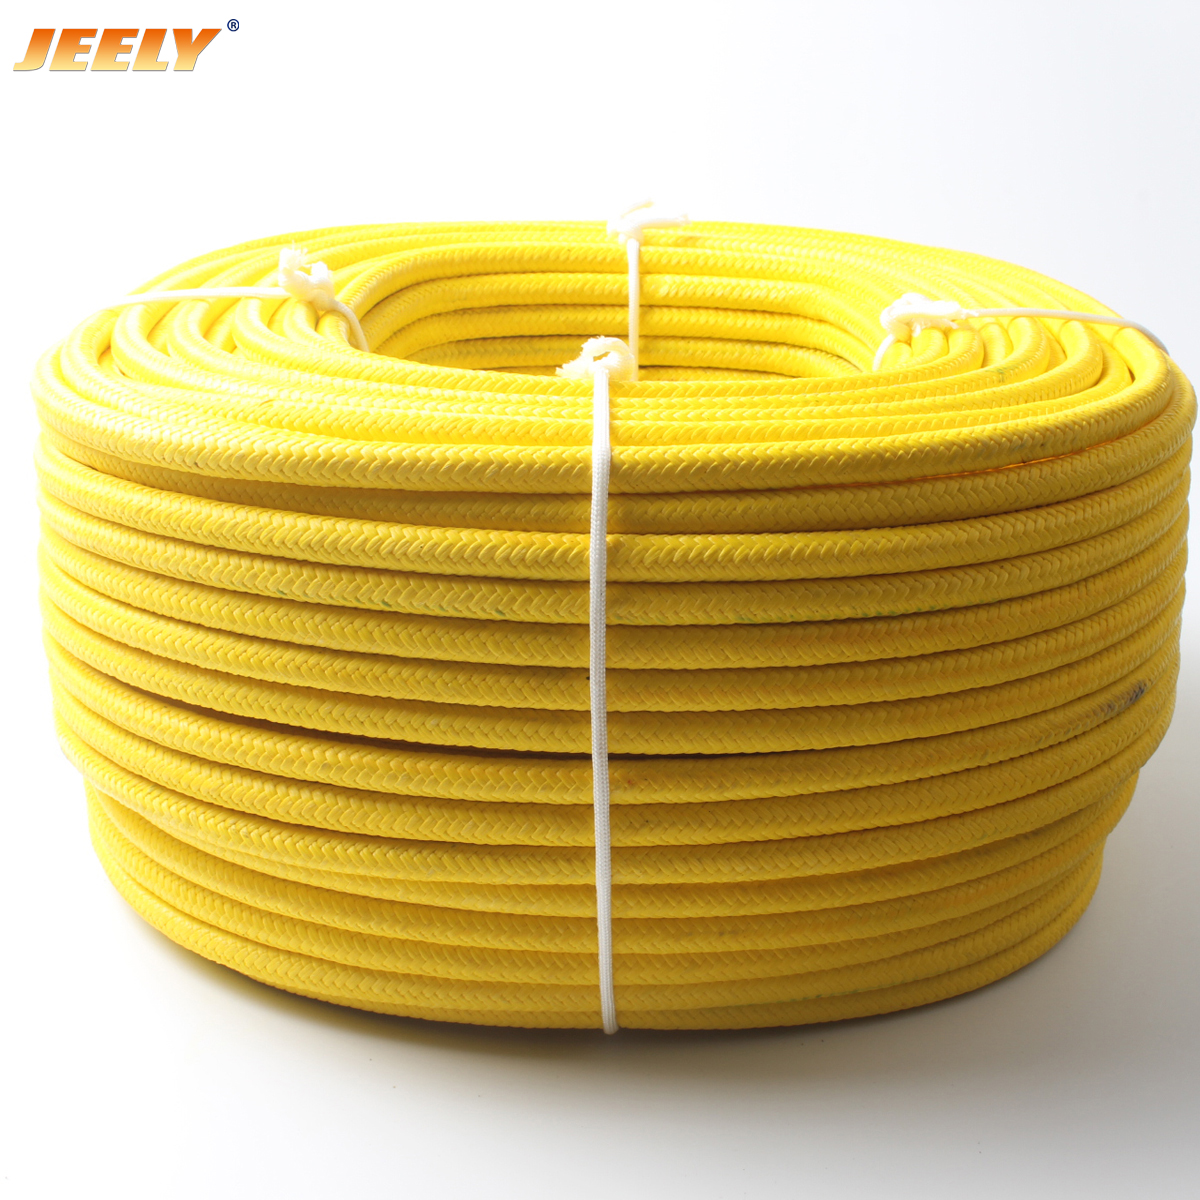 300m 10mm UHMWPE Fiber Core with Polyester Jacket Anchor Towing Rope Winch Rope